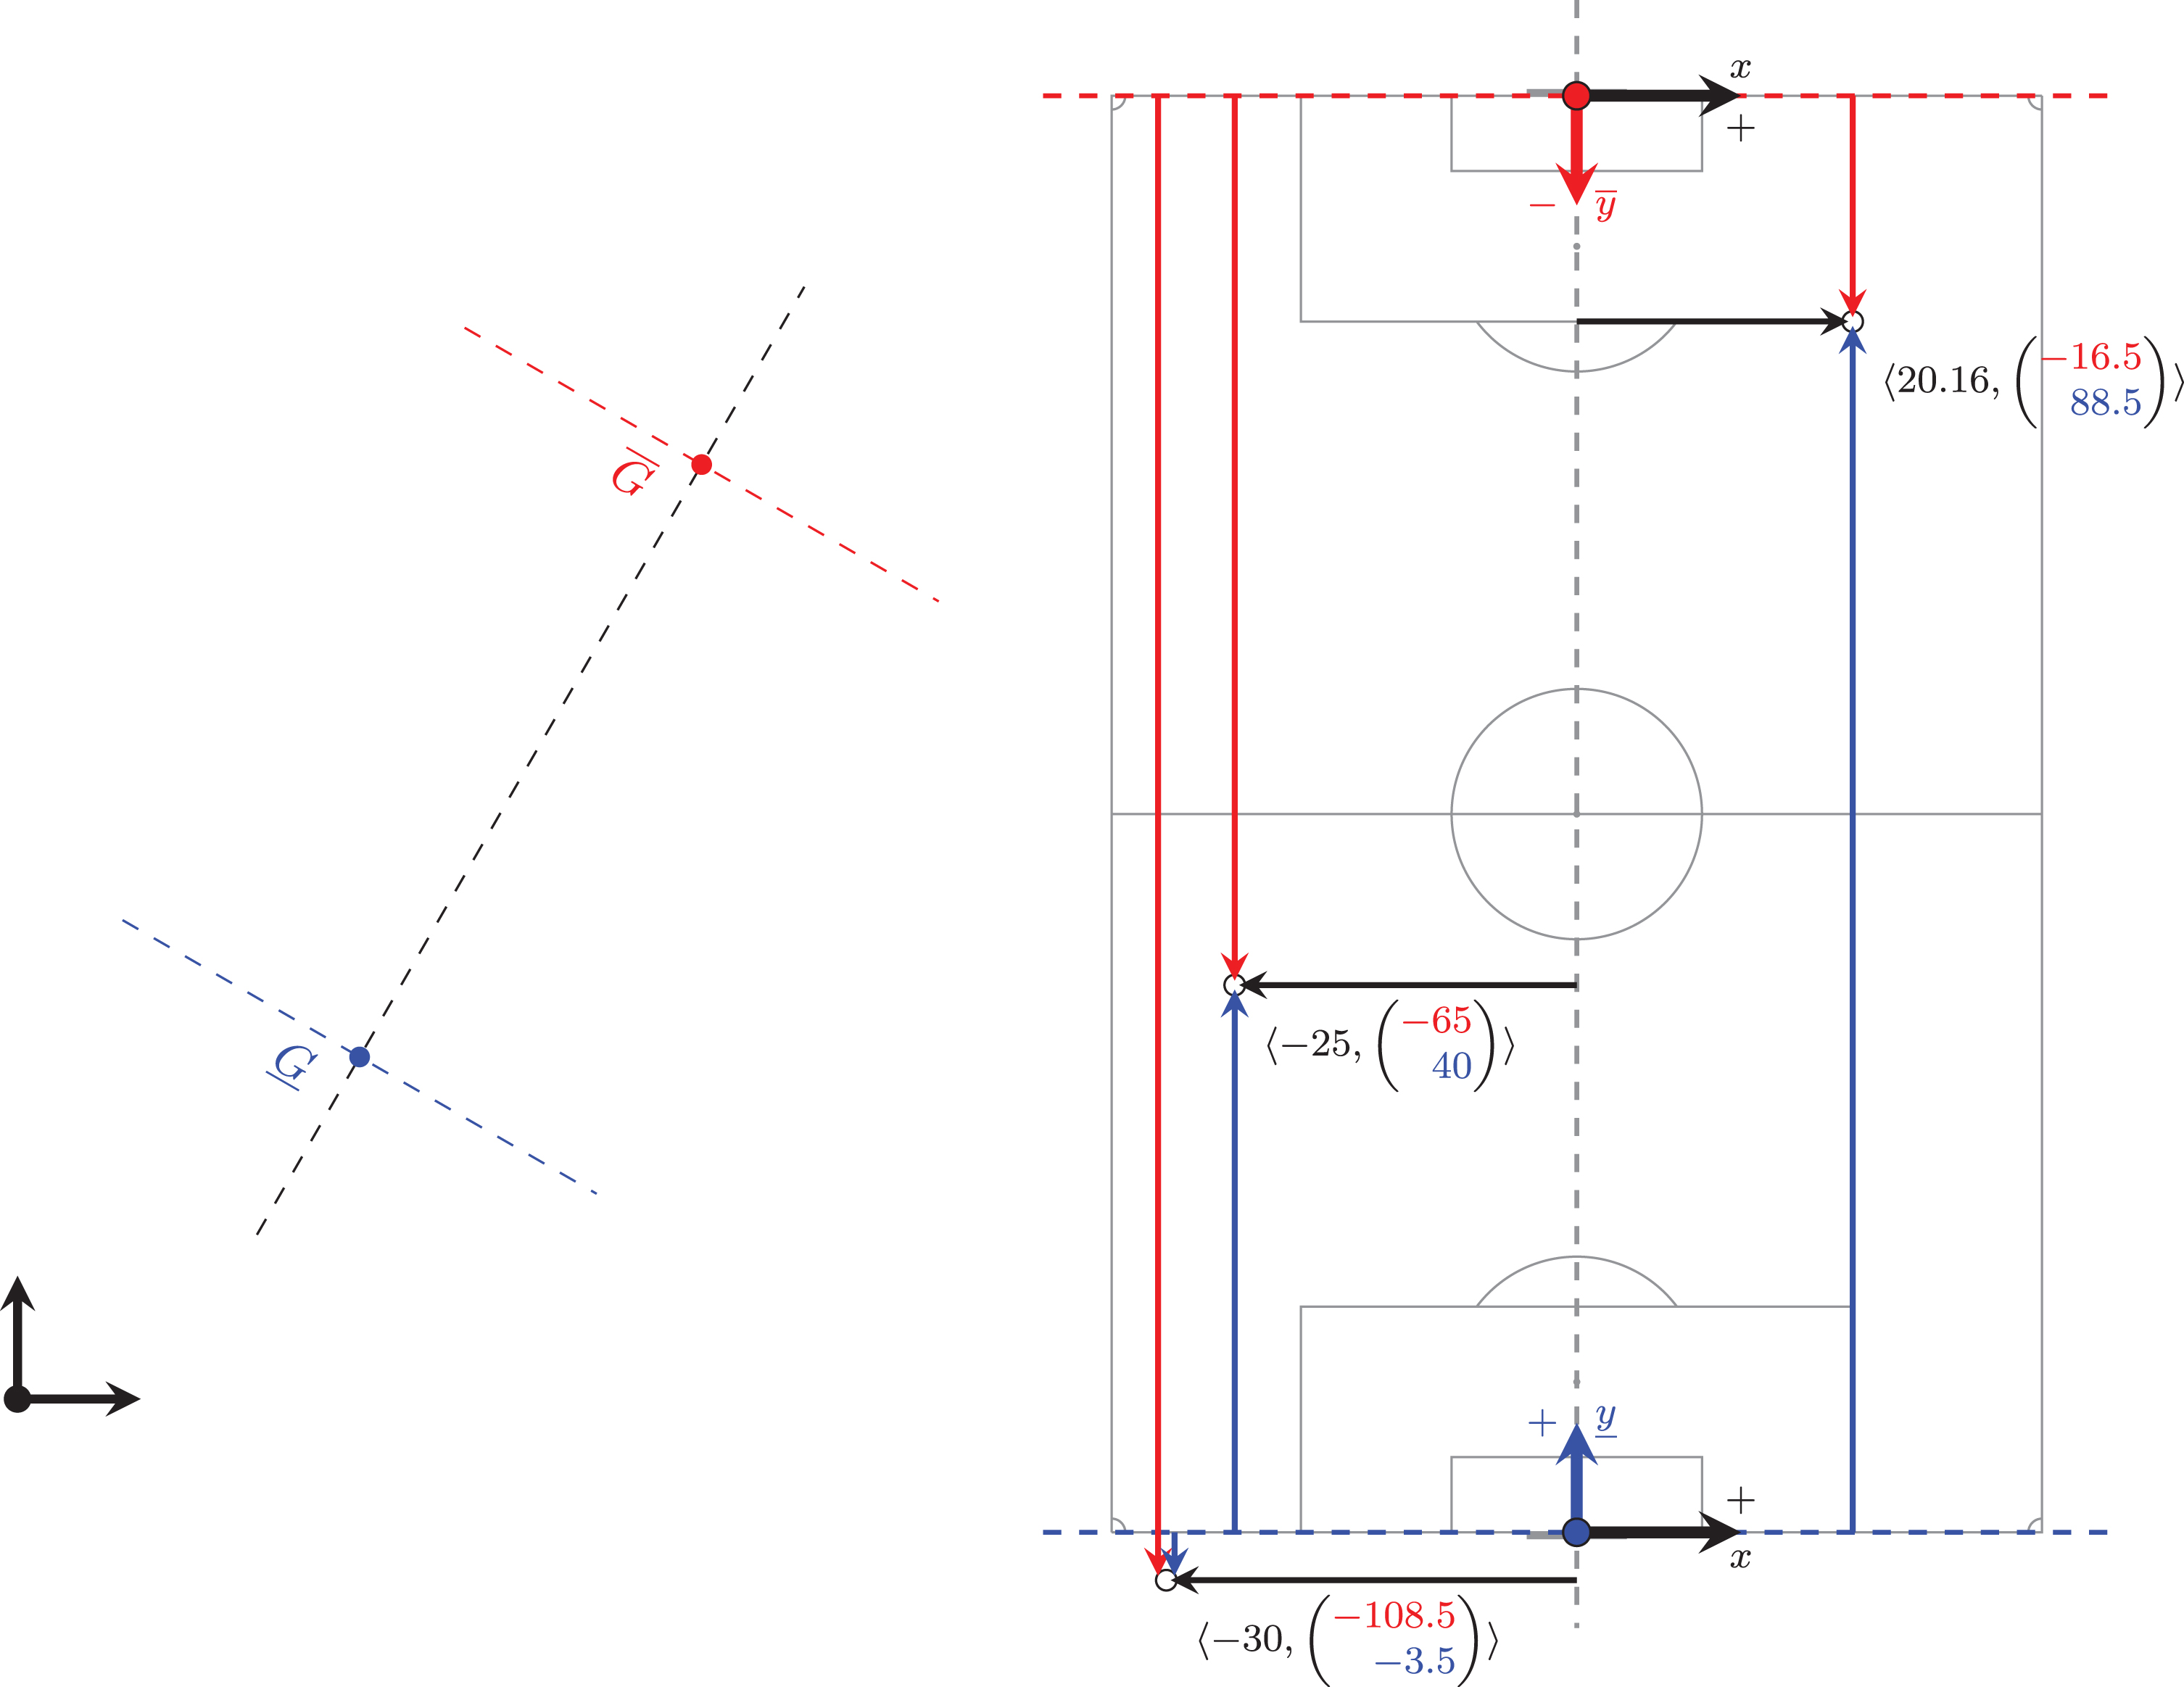 Goal-aligned coordinate systems are defined by aligning the axes of a Cartesian coordinate system with the line through two given points, 
G¯
 and 
G¯
, the centers of the goal defended and of the goal attacked (left). Each location on the field of play (right) is then represented by one lateral and two complementary longitudinal coordinates, one corresponding to a defensive perspective of a team (distance to give from own goal line) and the other corresponding to an attacking perspective of the same team (distance to go to opposition goal line).